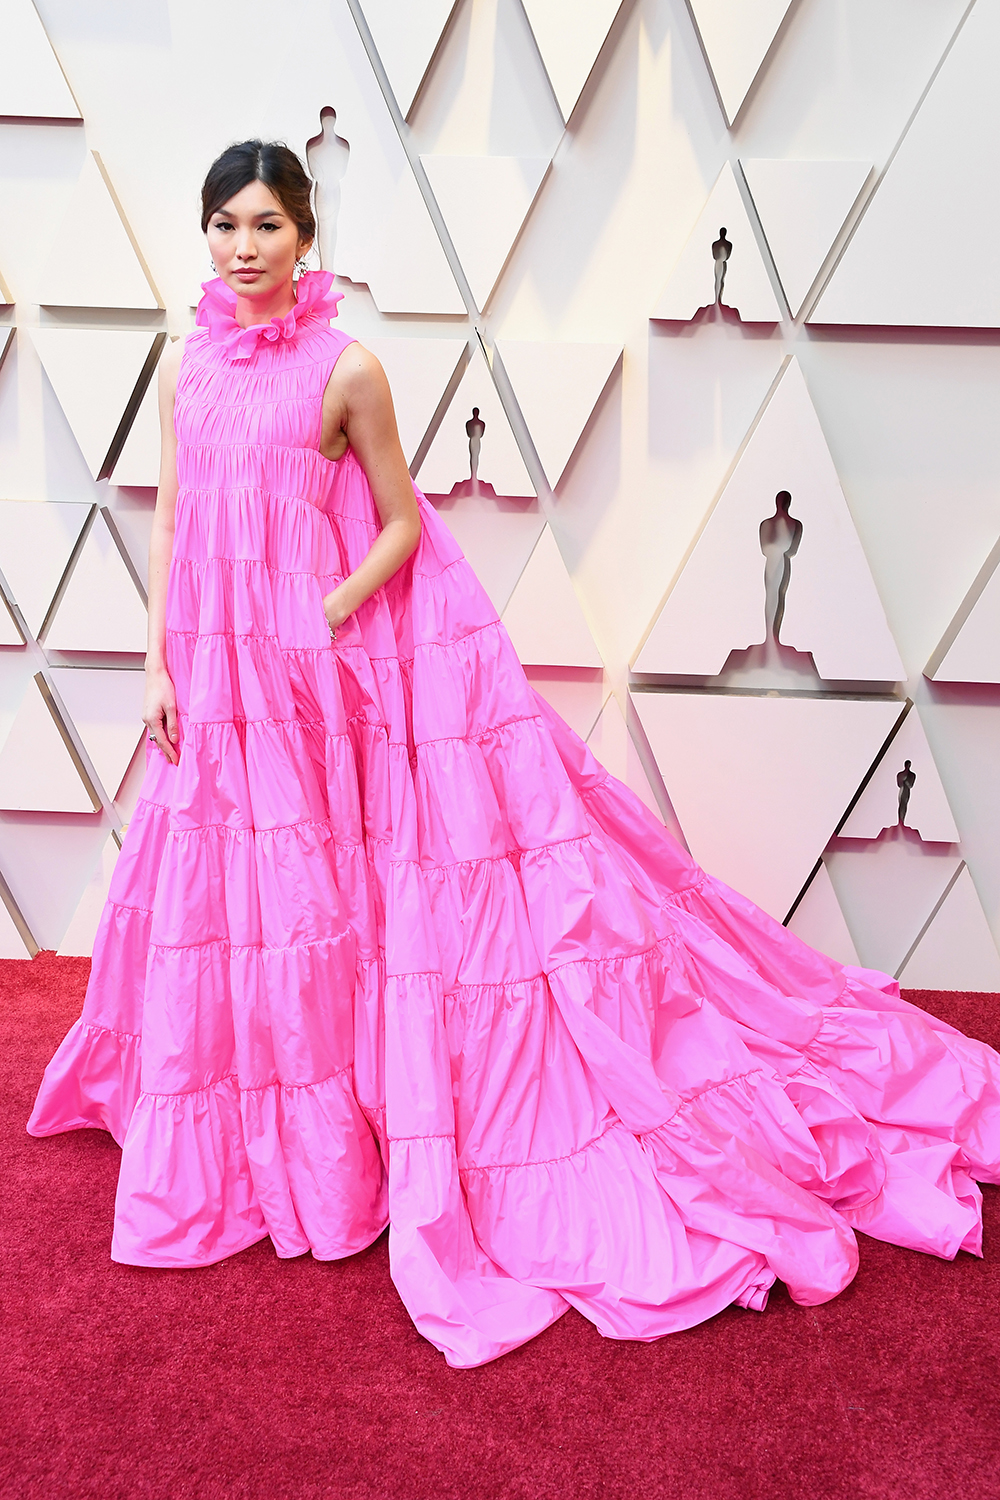 HOLLYWOOD, CA - FEBRUARY 24: Gemma Chan attends the 91st Annual Academy Awards at Hollywood and Highland on February 24, 2019 in Hollywood, California. (Photo by Steve Granitz/WireImage)